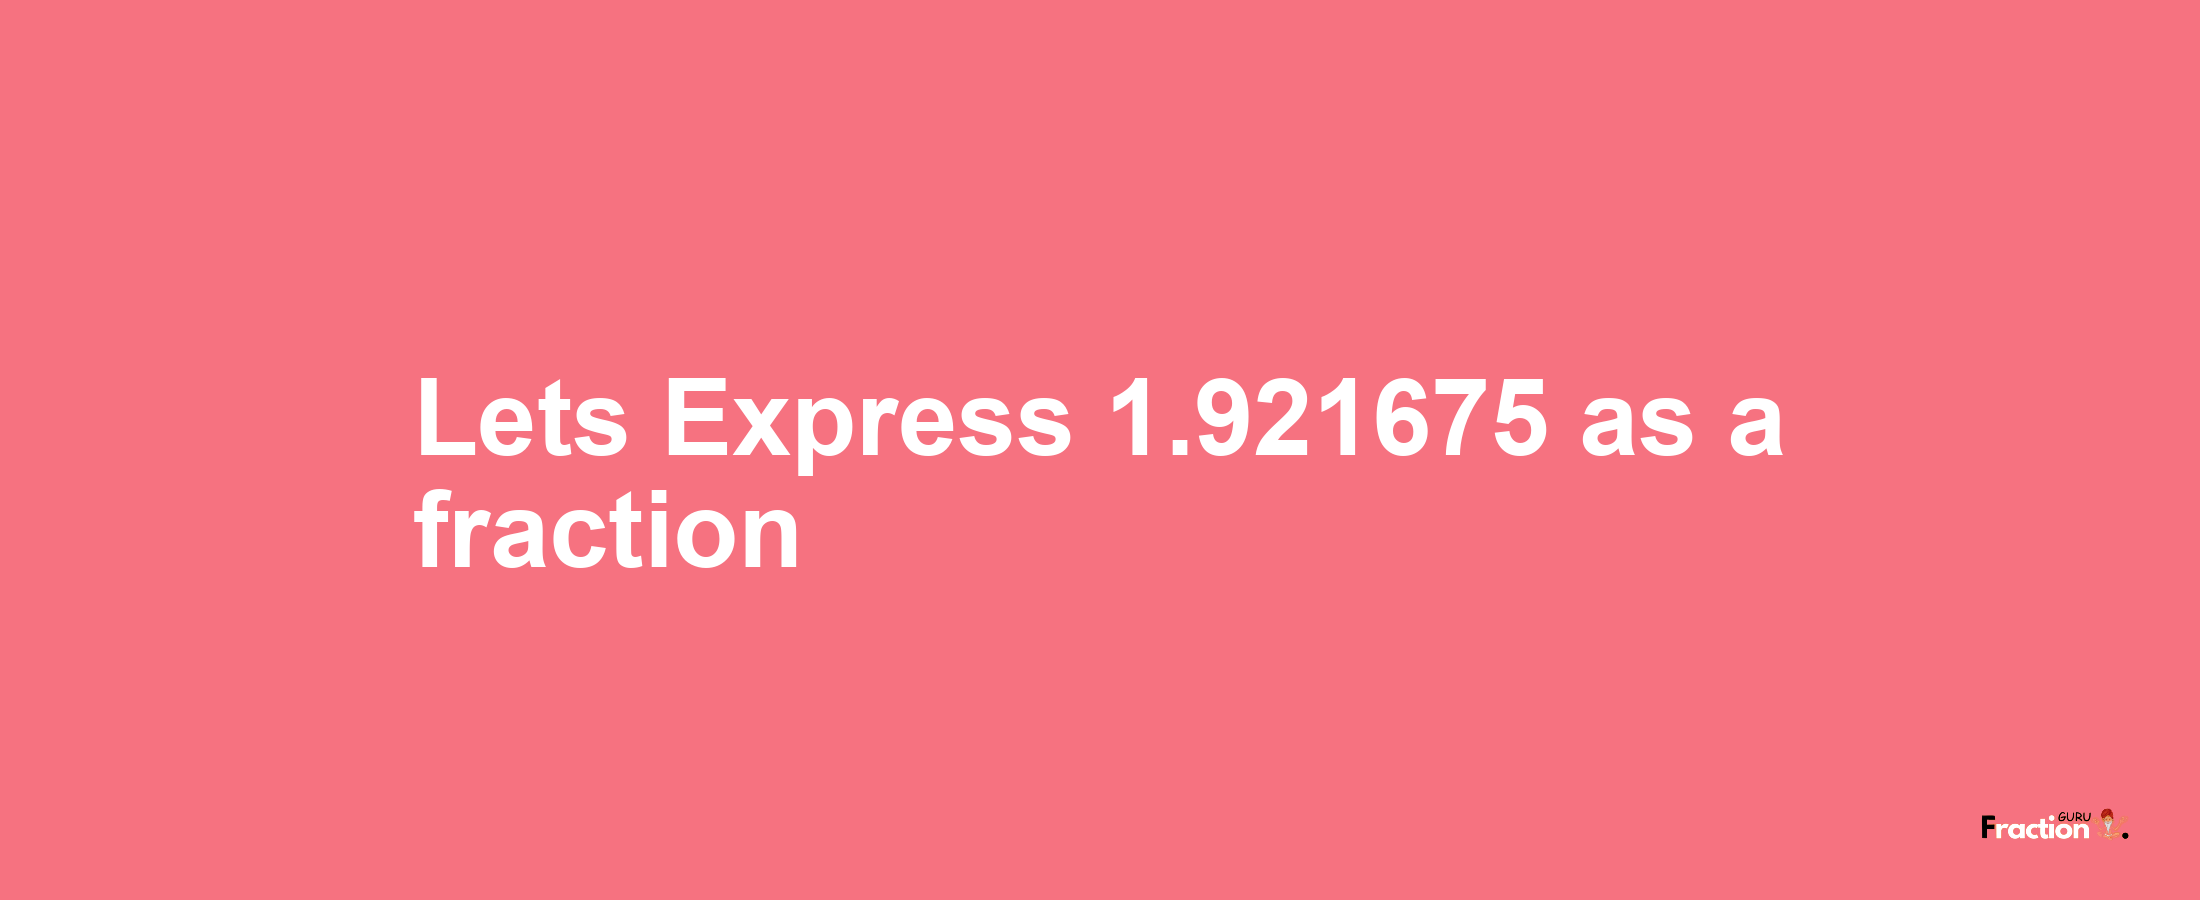 Lets Express 1.921675 as afraction